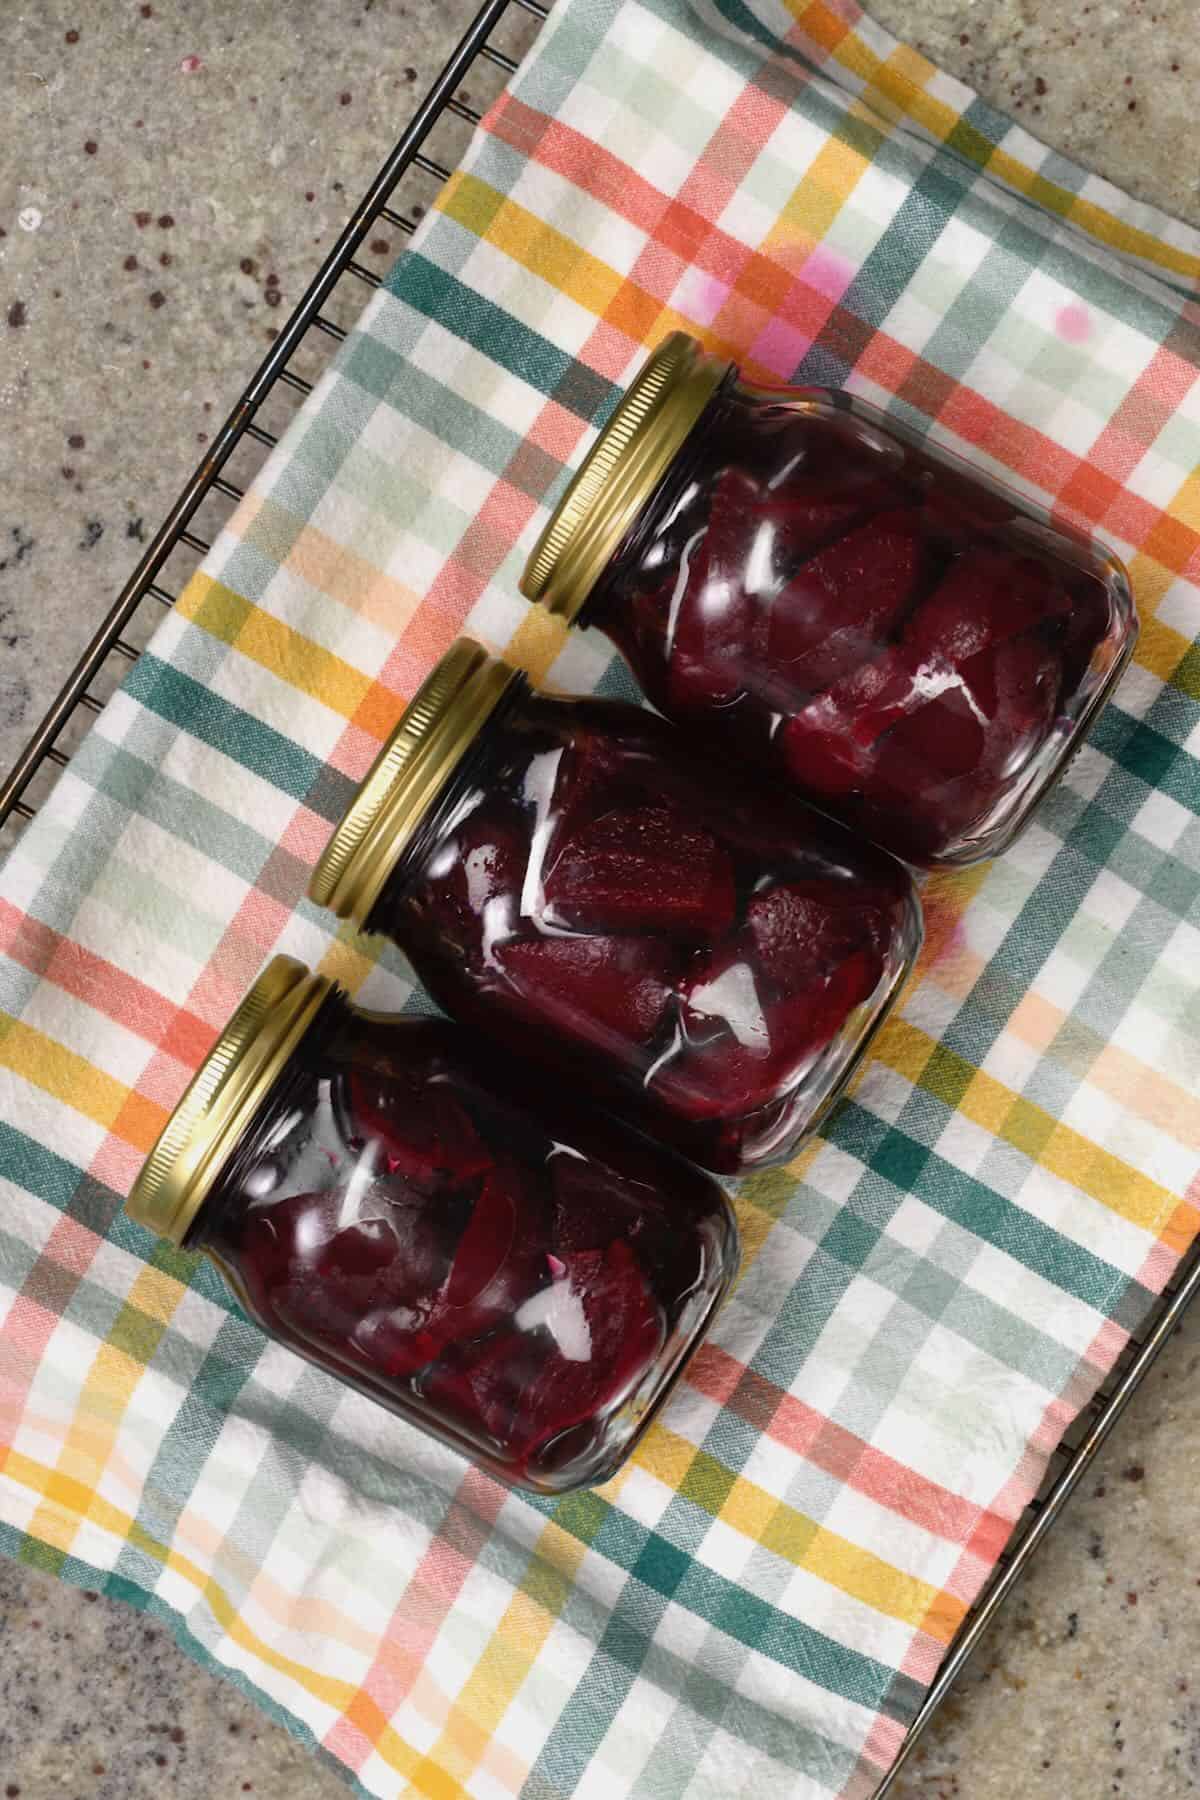 Three jars with pickled beets